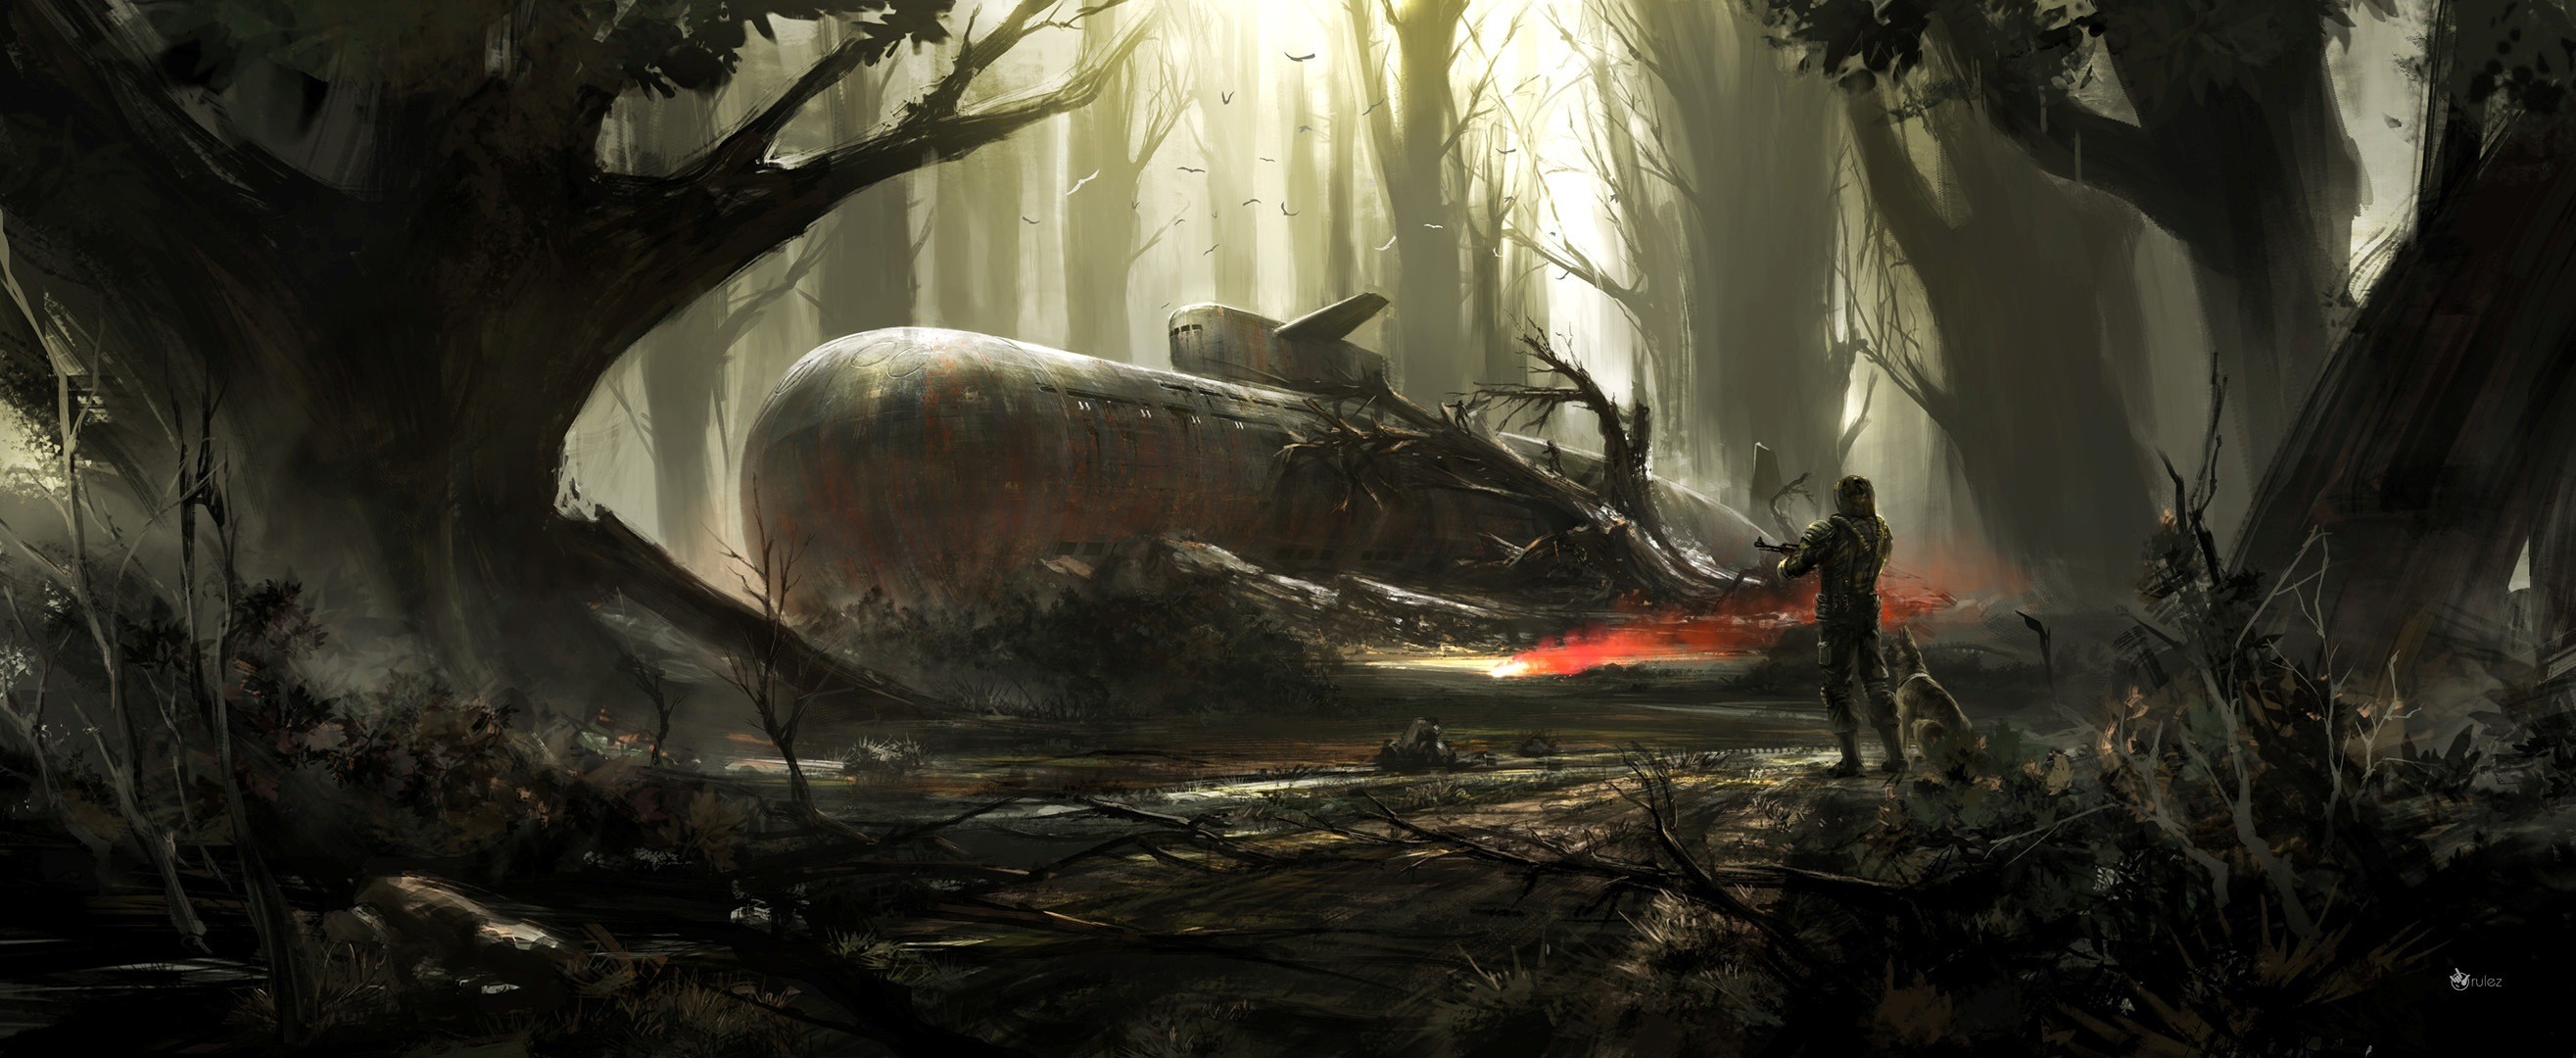 soldier, Submarine, Artwork, Forest, Fallout, Fallout 4, Video games Wallpaper